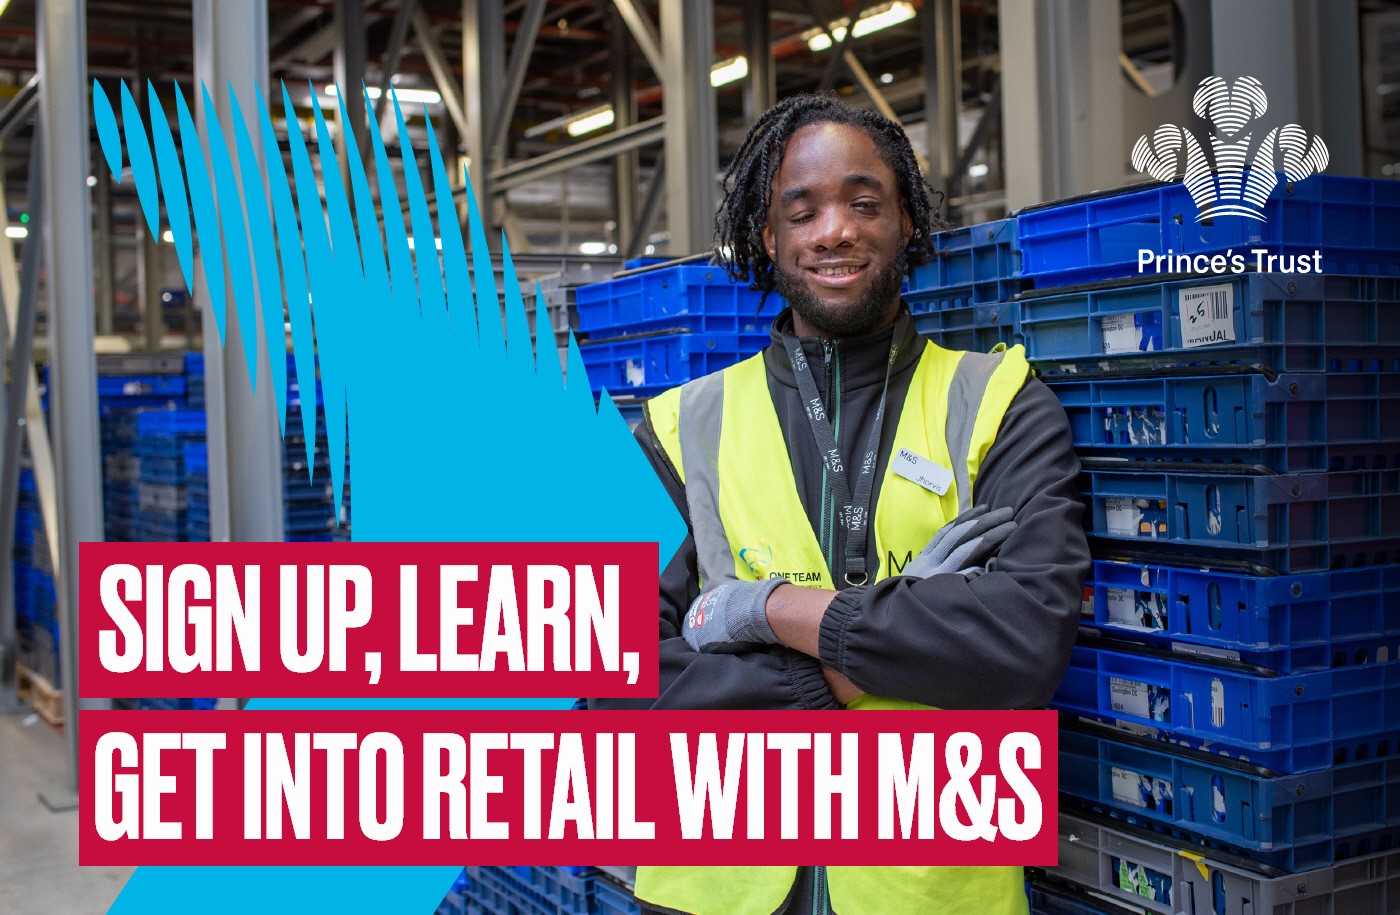 Sign up to ‘Get into Retail’ with M&S 